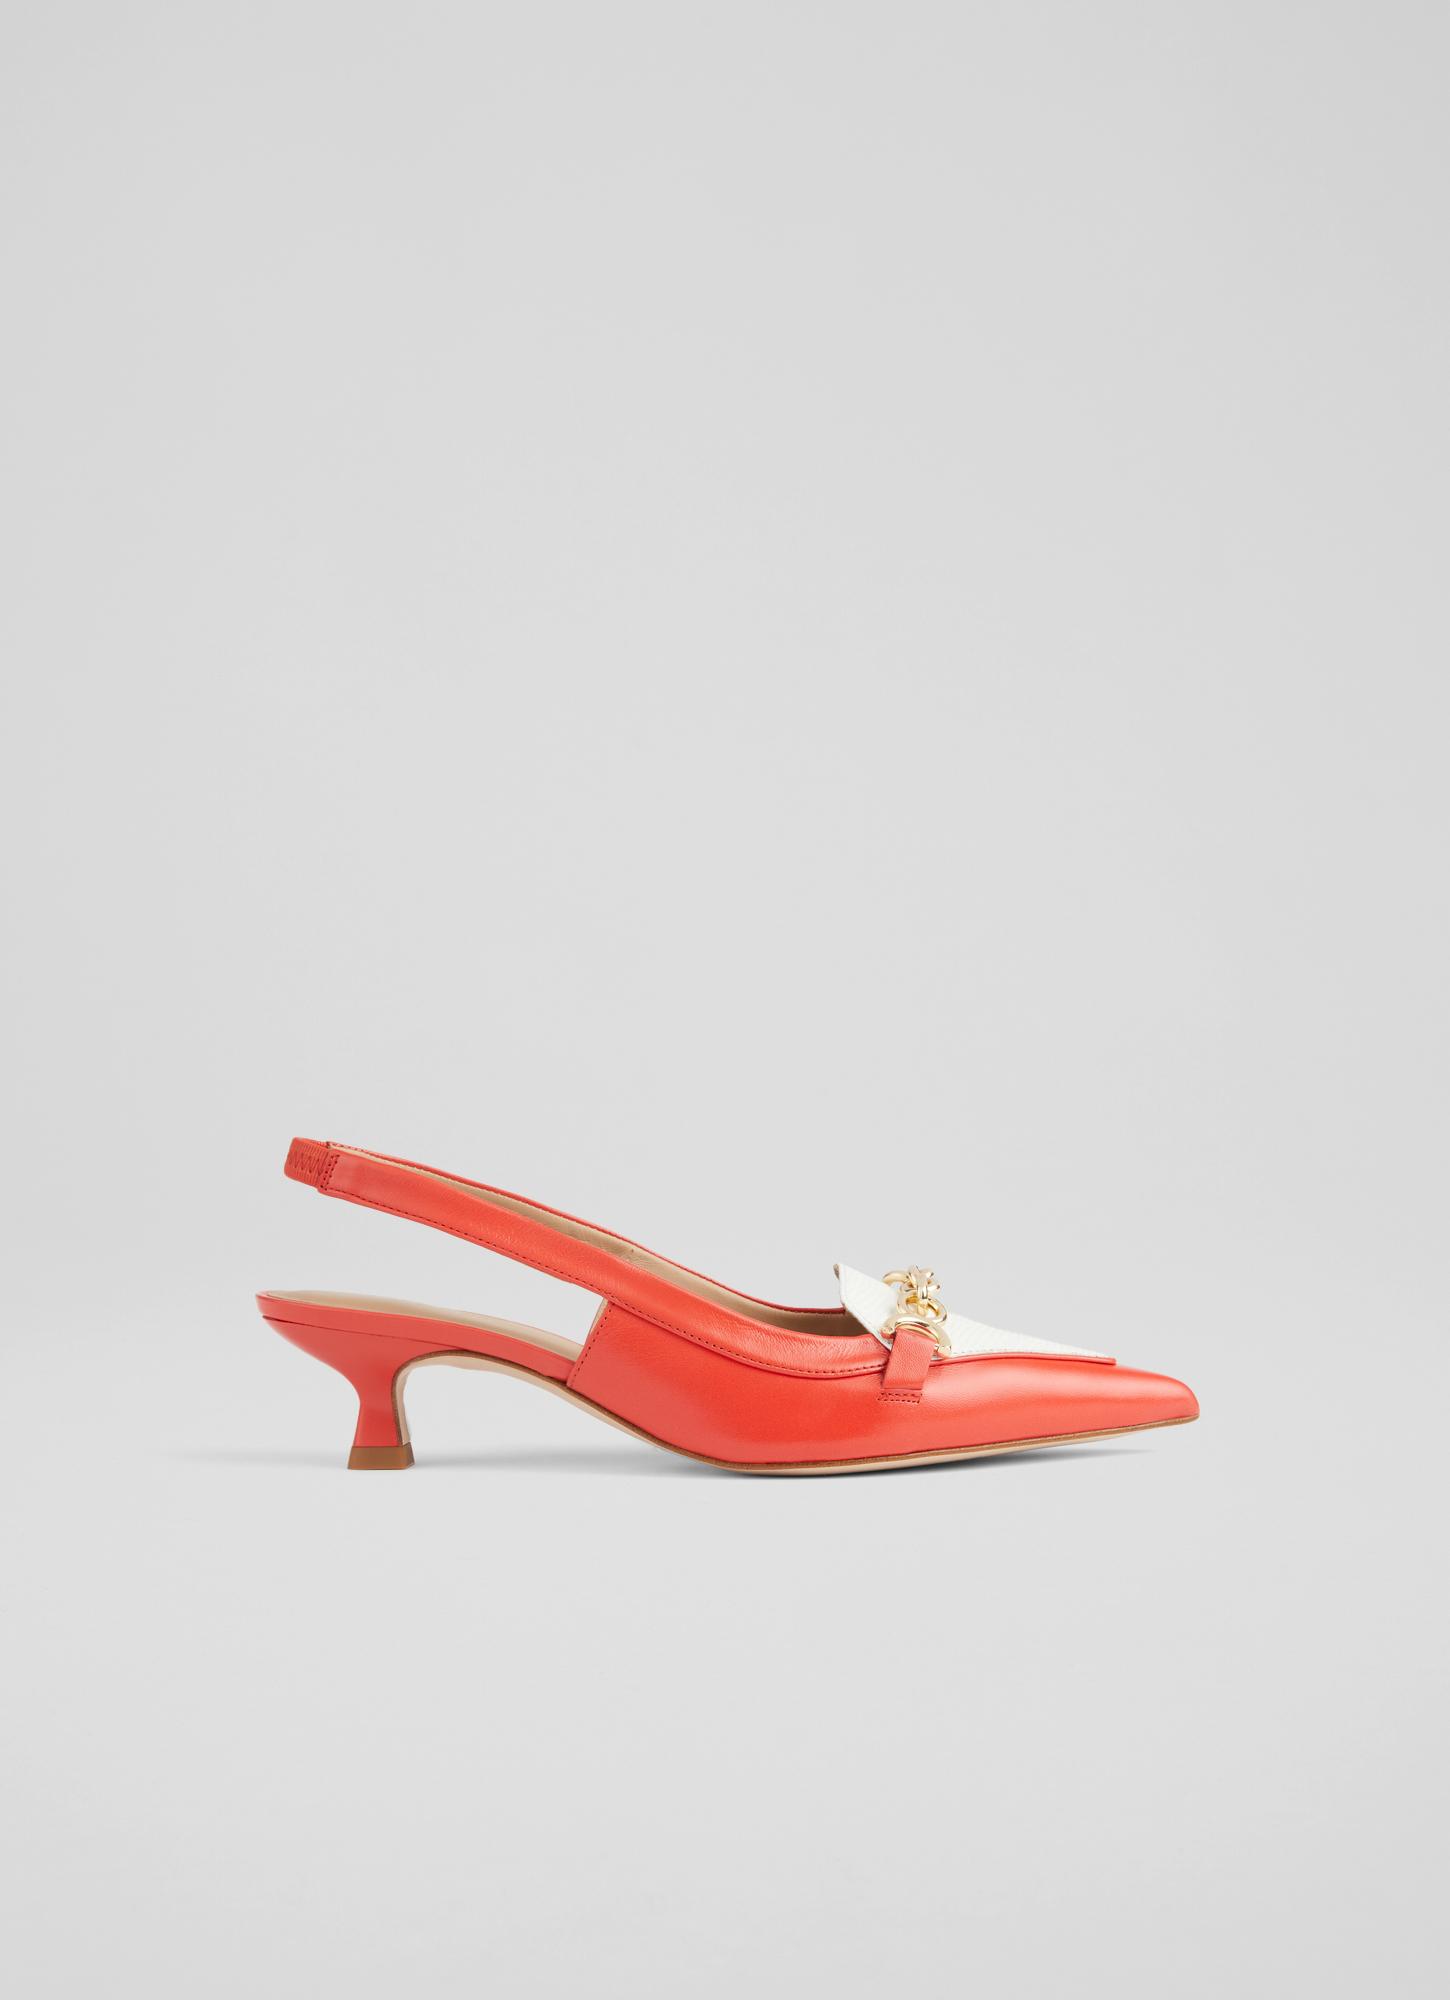 Reagan Red and Ivory Lizard-Effect Leather Kitten Heel Slingbacks, Red